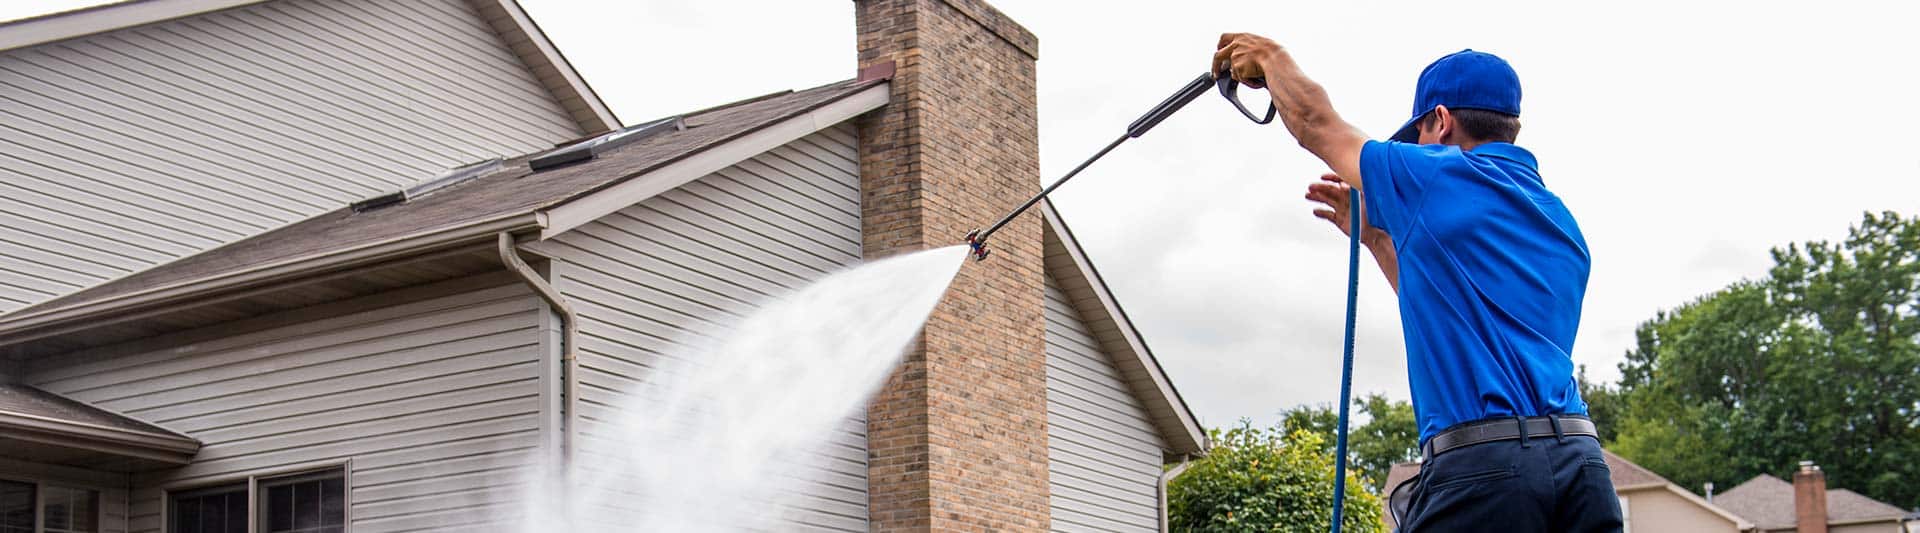 House Washing Services In Camas Wa